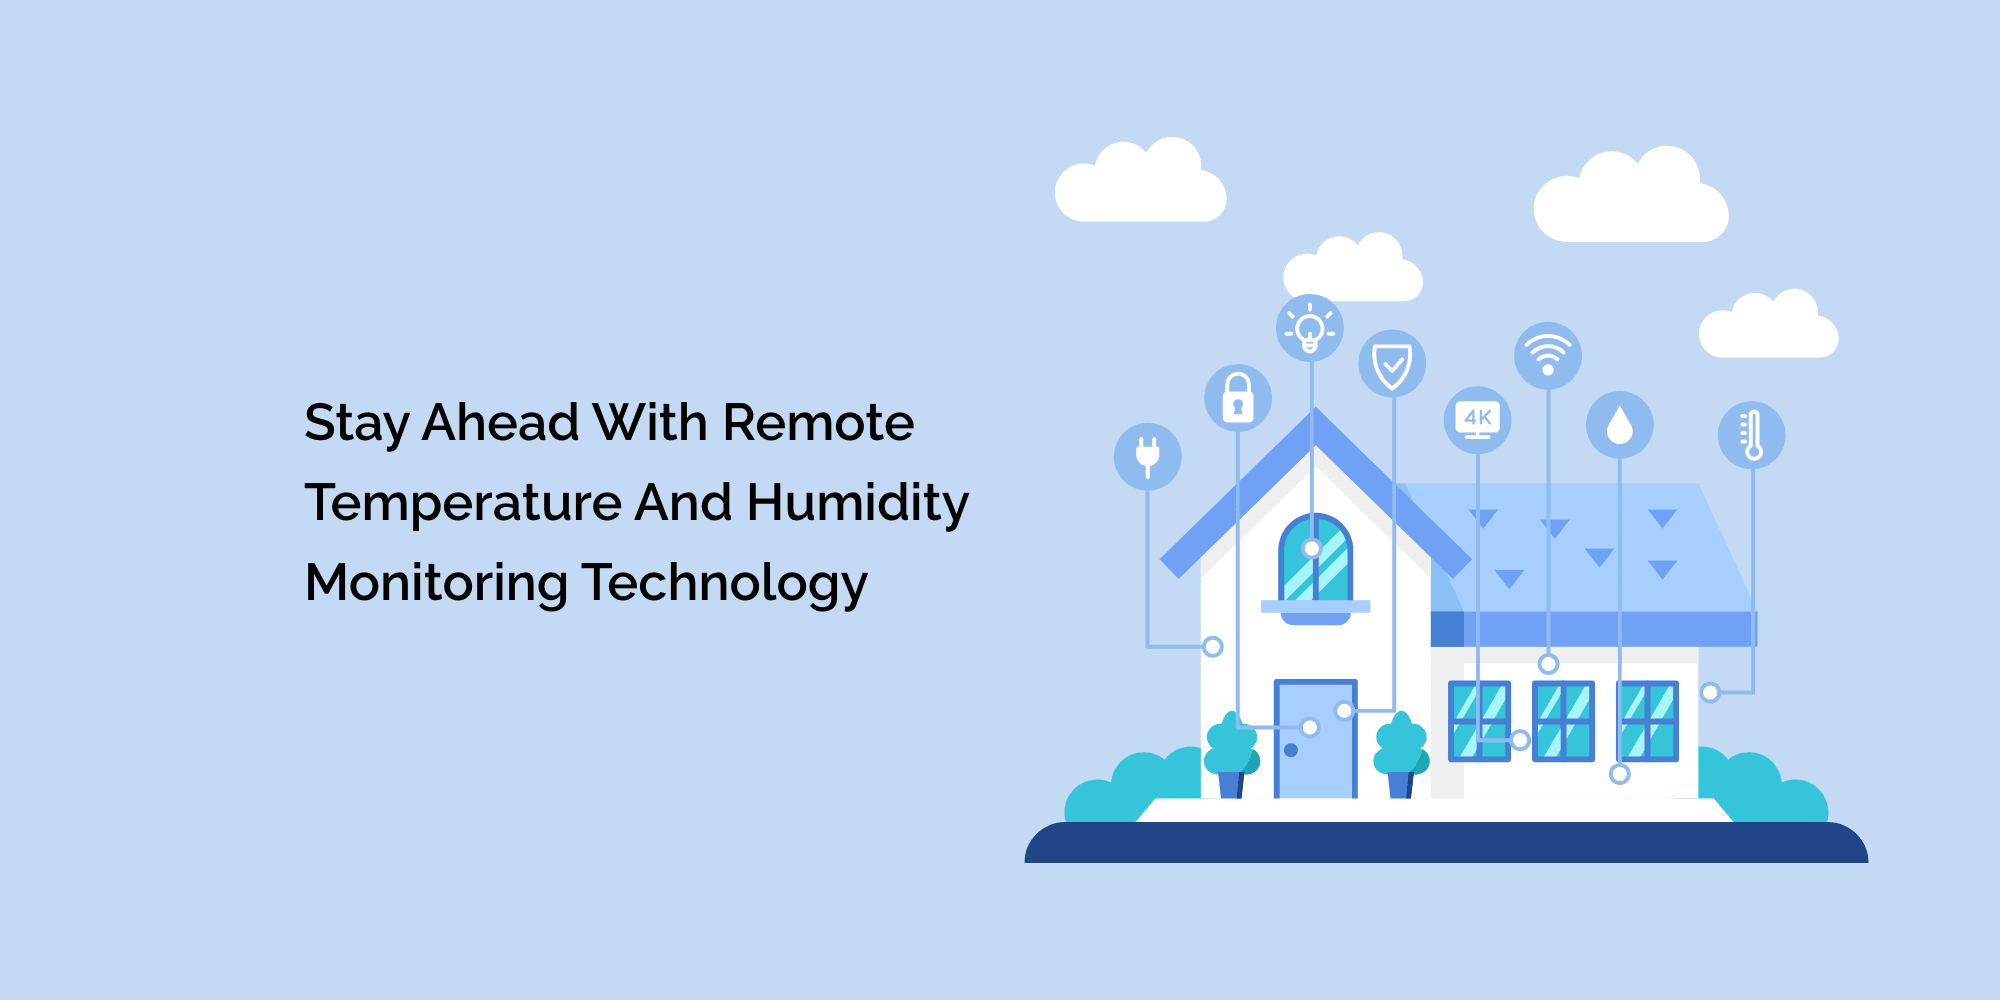 Stay Ahead with Remote Temperature and Humidity Monitoring Technology